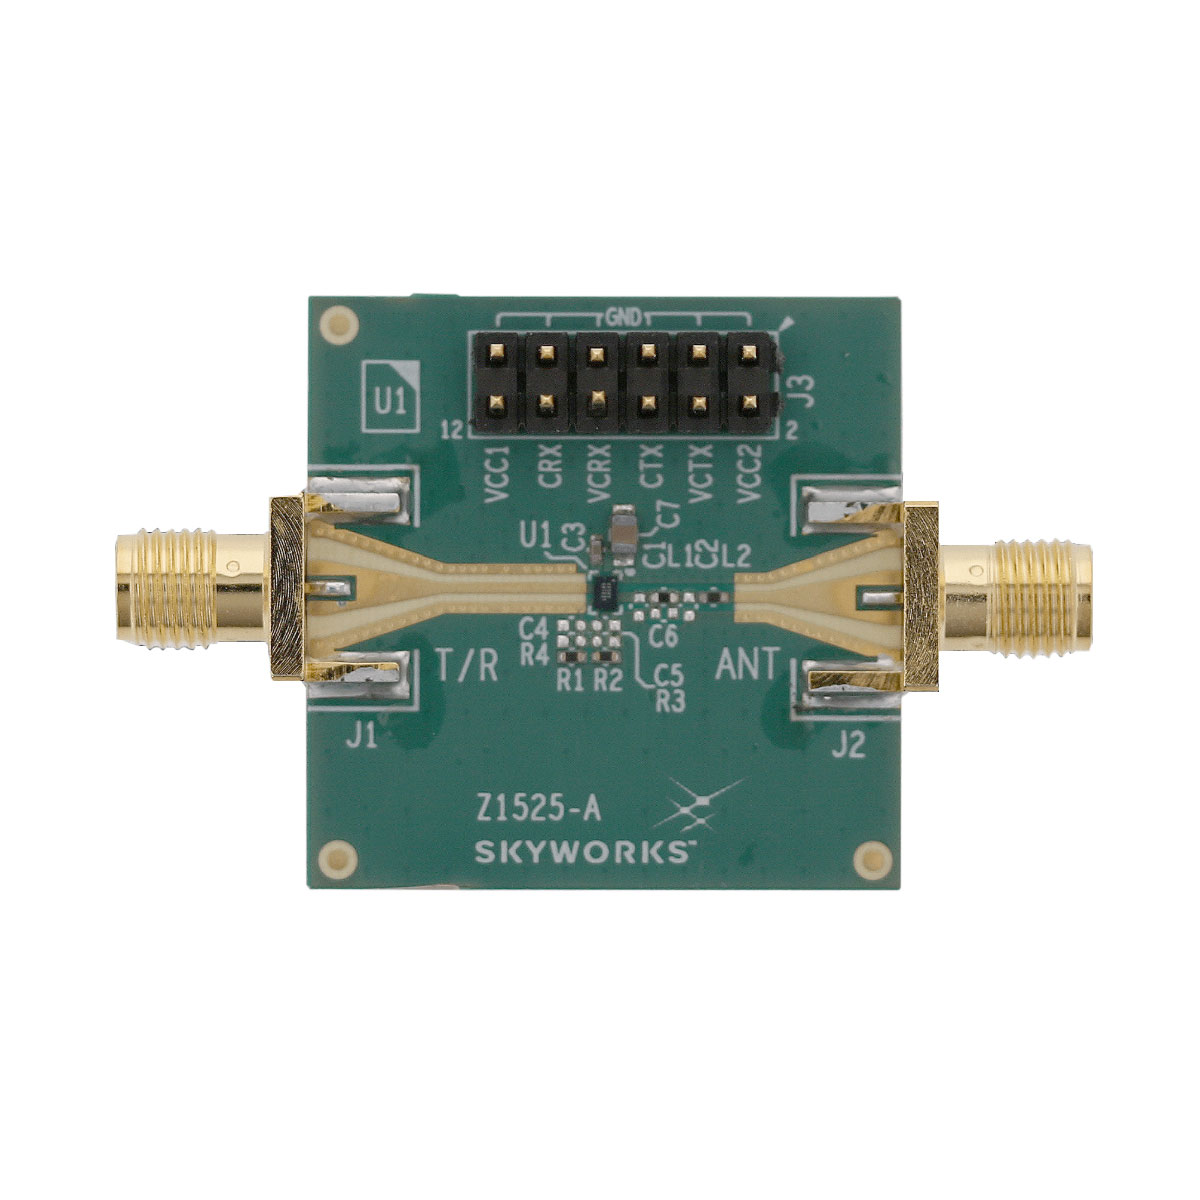 【SKY65342-31-EVB】2.45GHZ FRONT END MODULE WITH IN